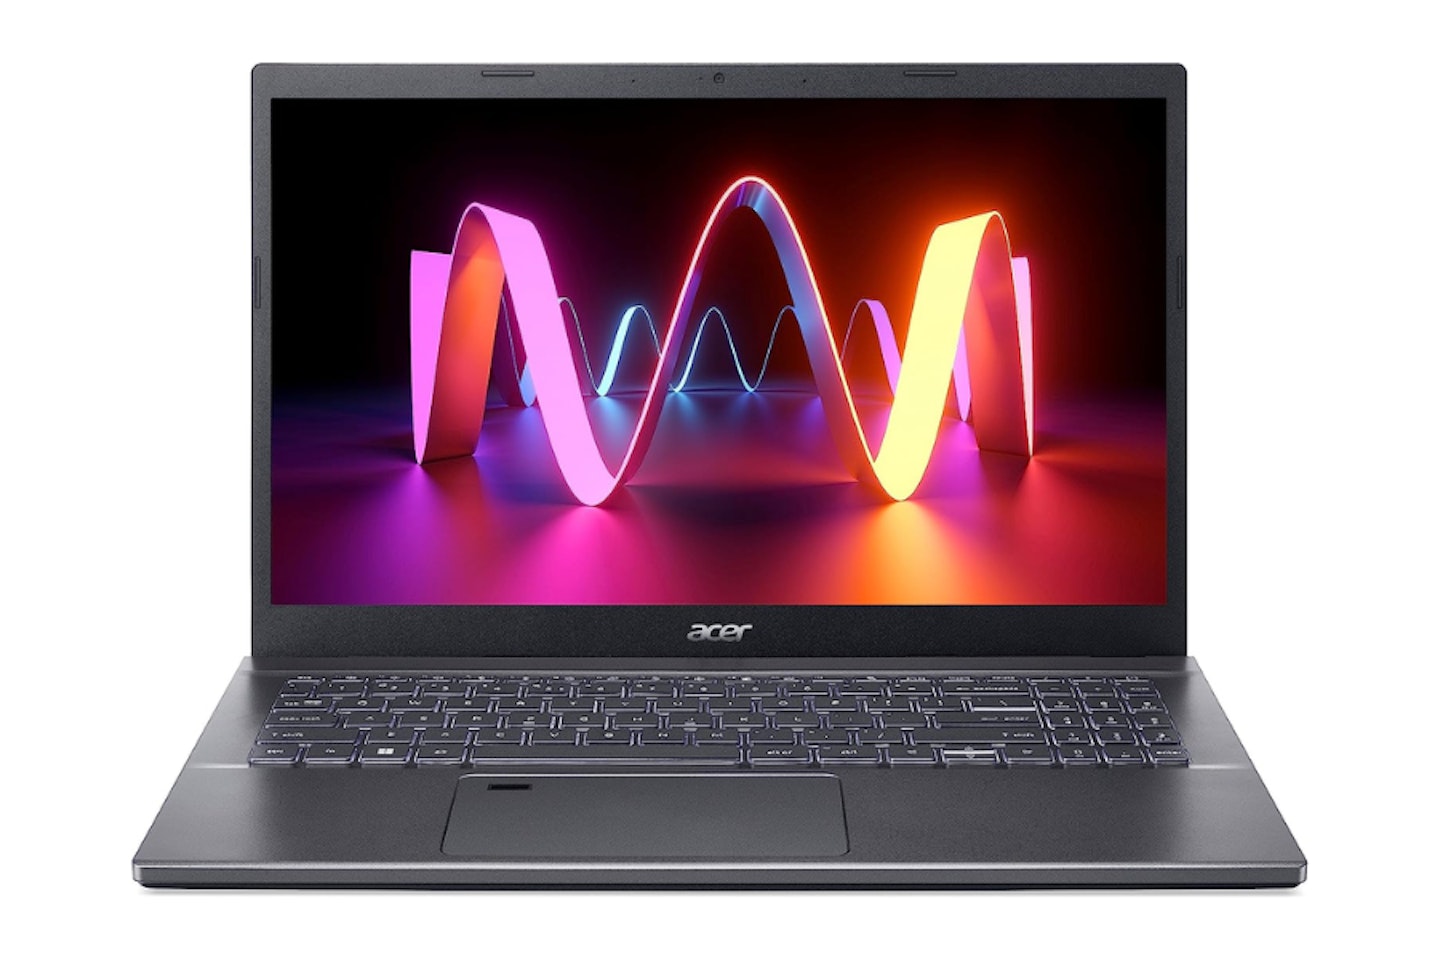 Acer Aspire 5 15.6 Inch Laptop - possibly the best student laptop